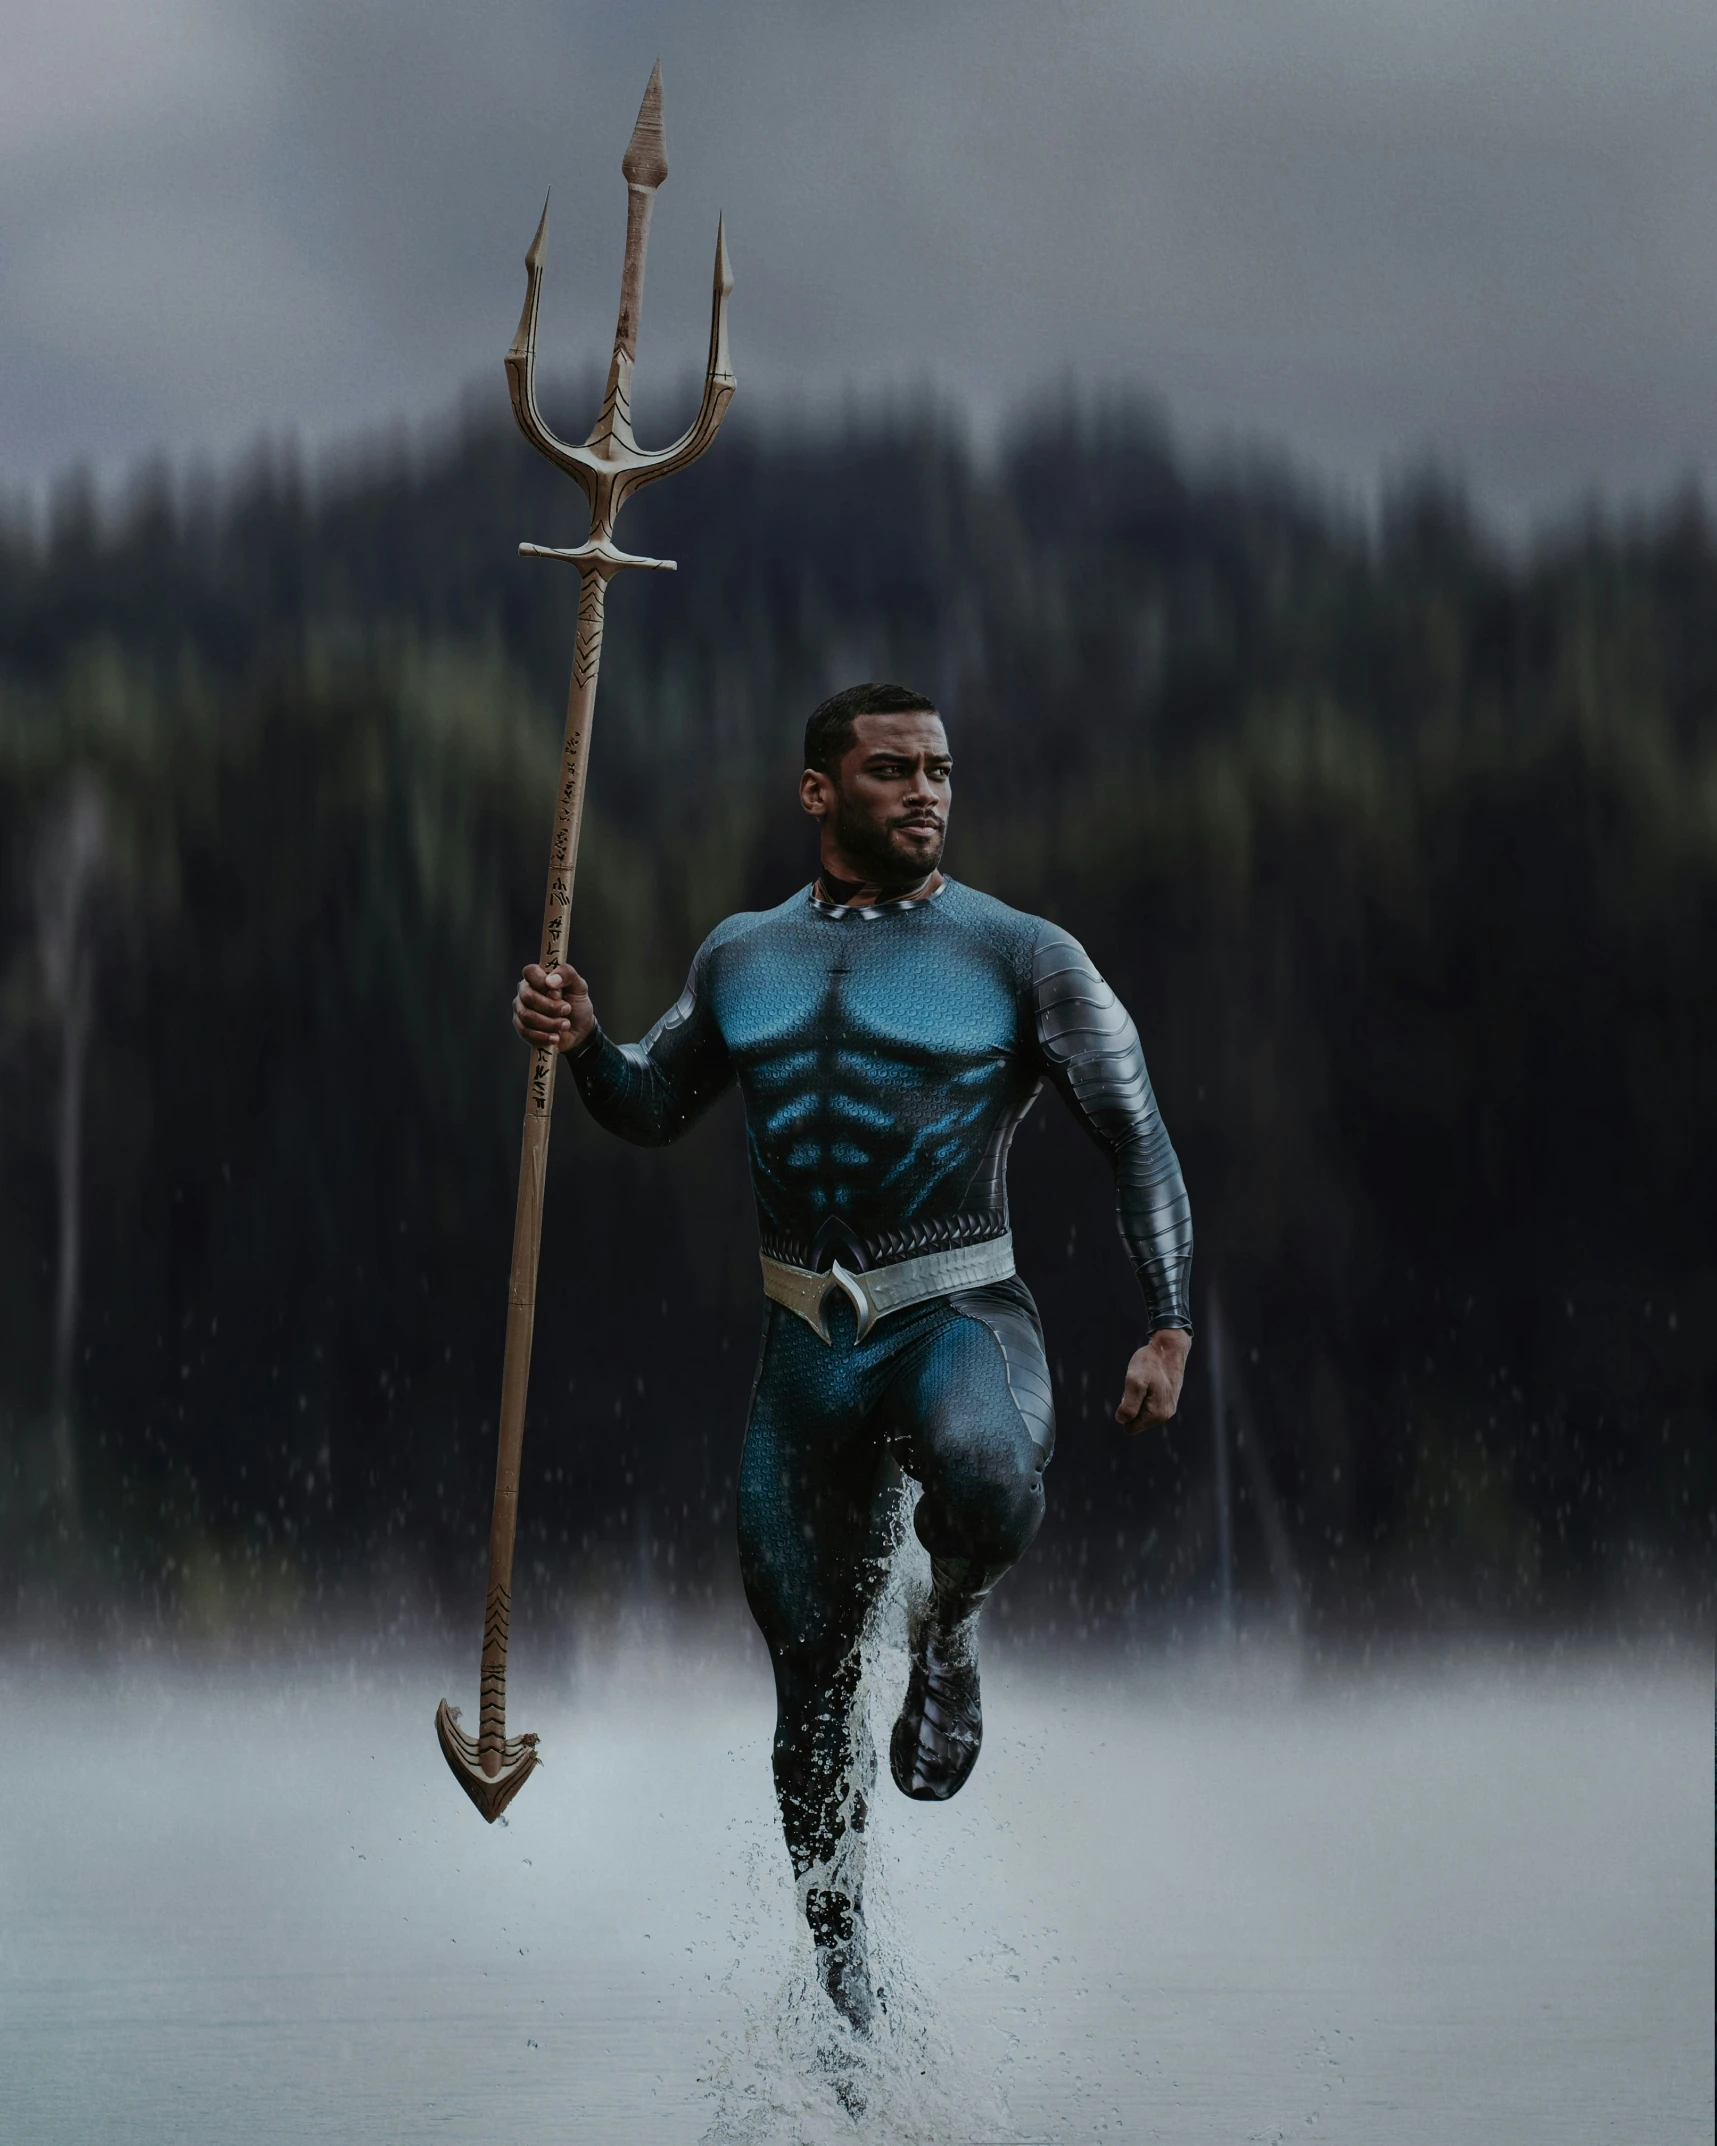 a man with an olympic style body holding an anchor